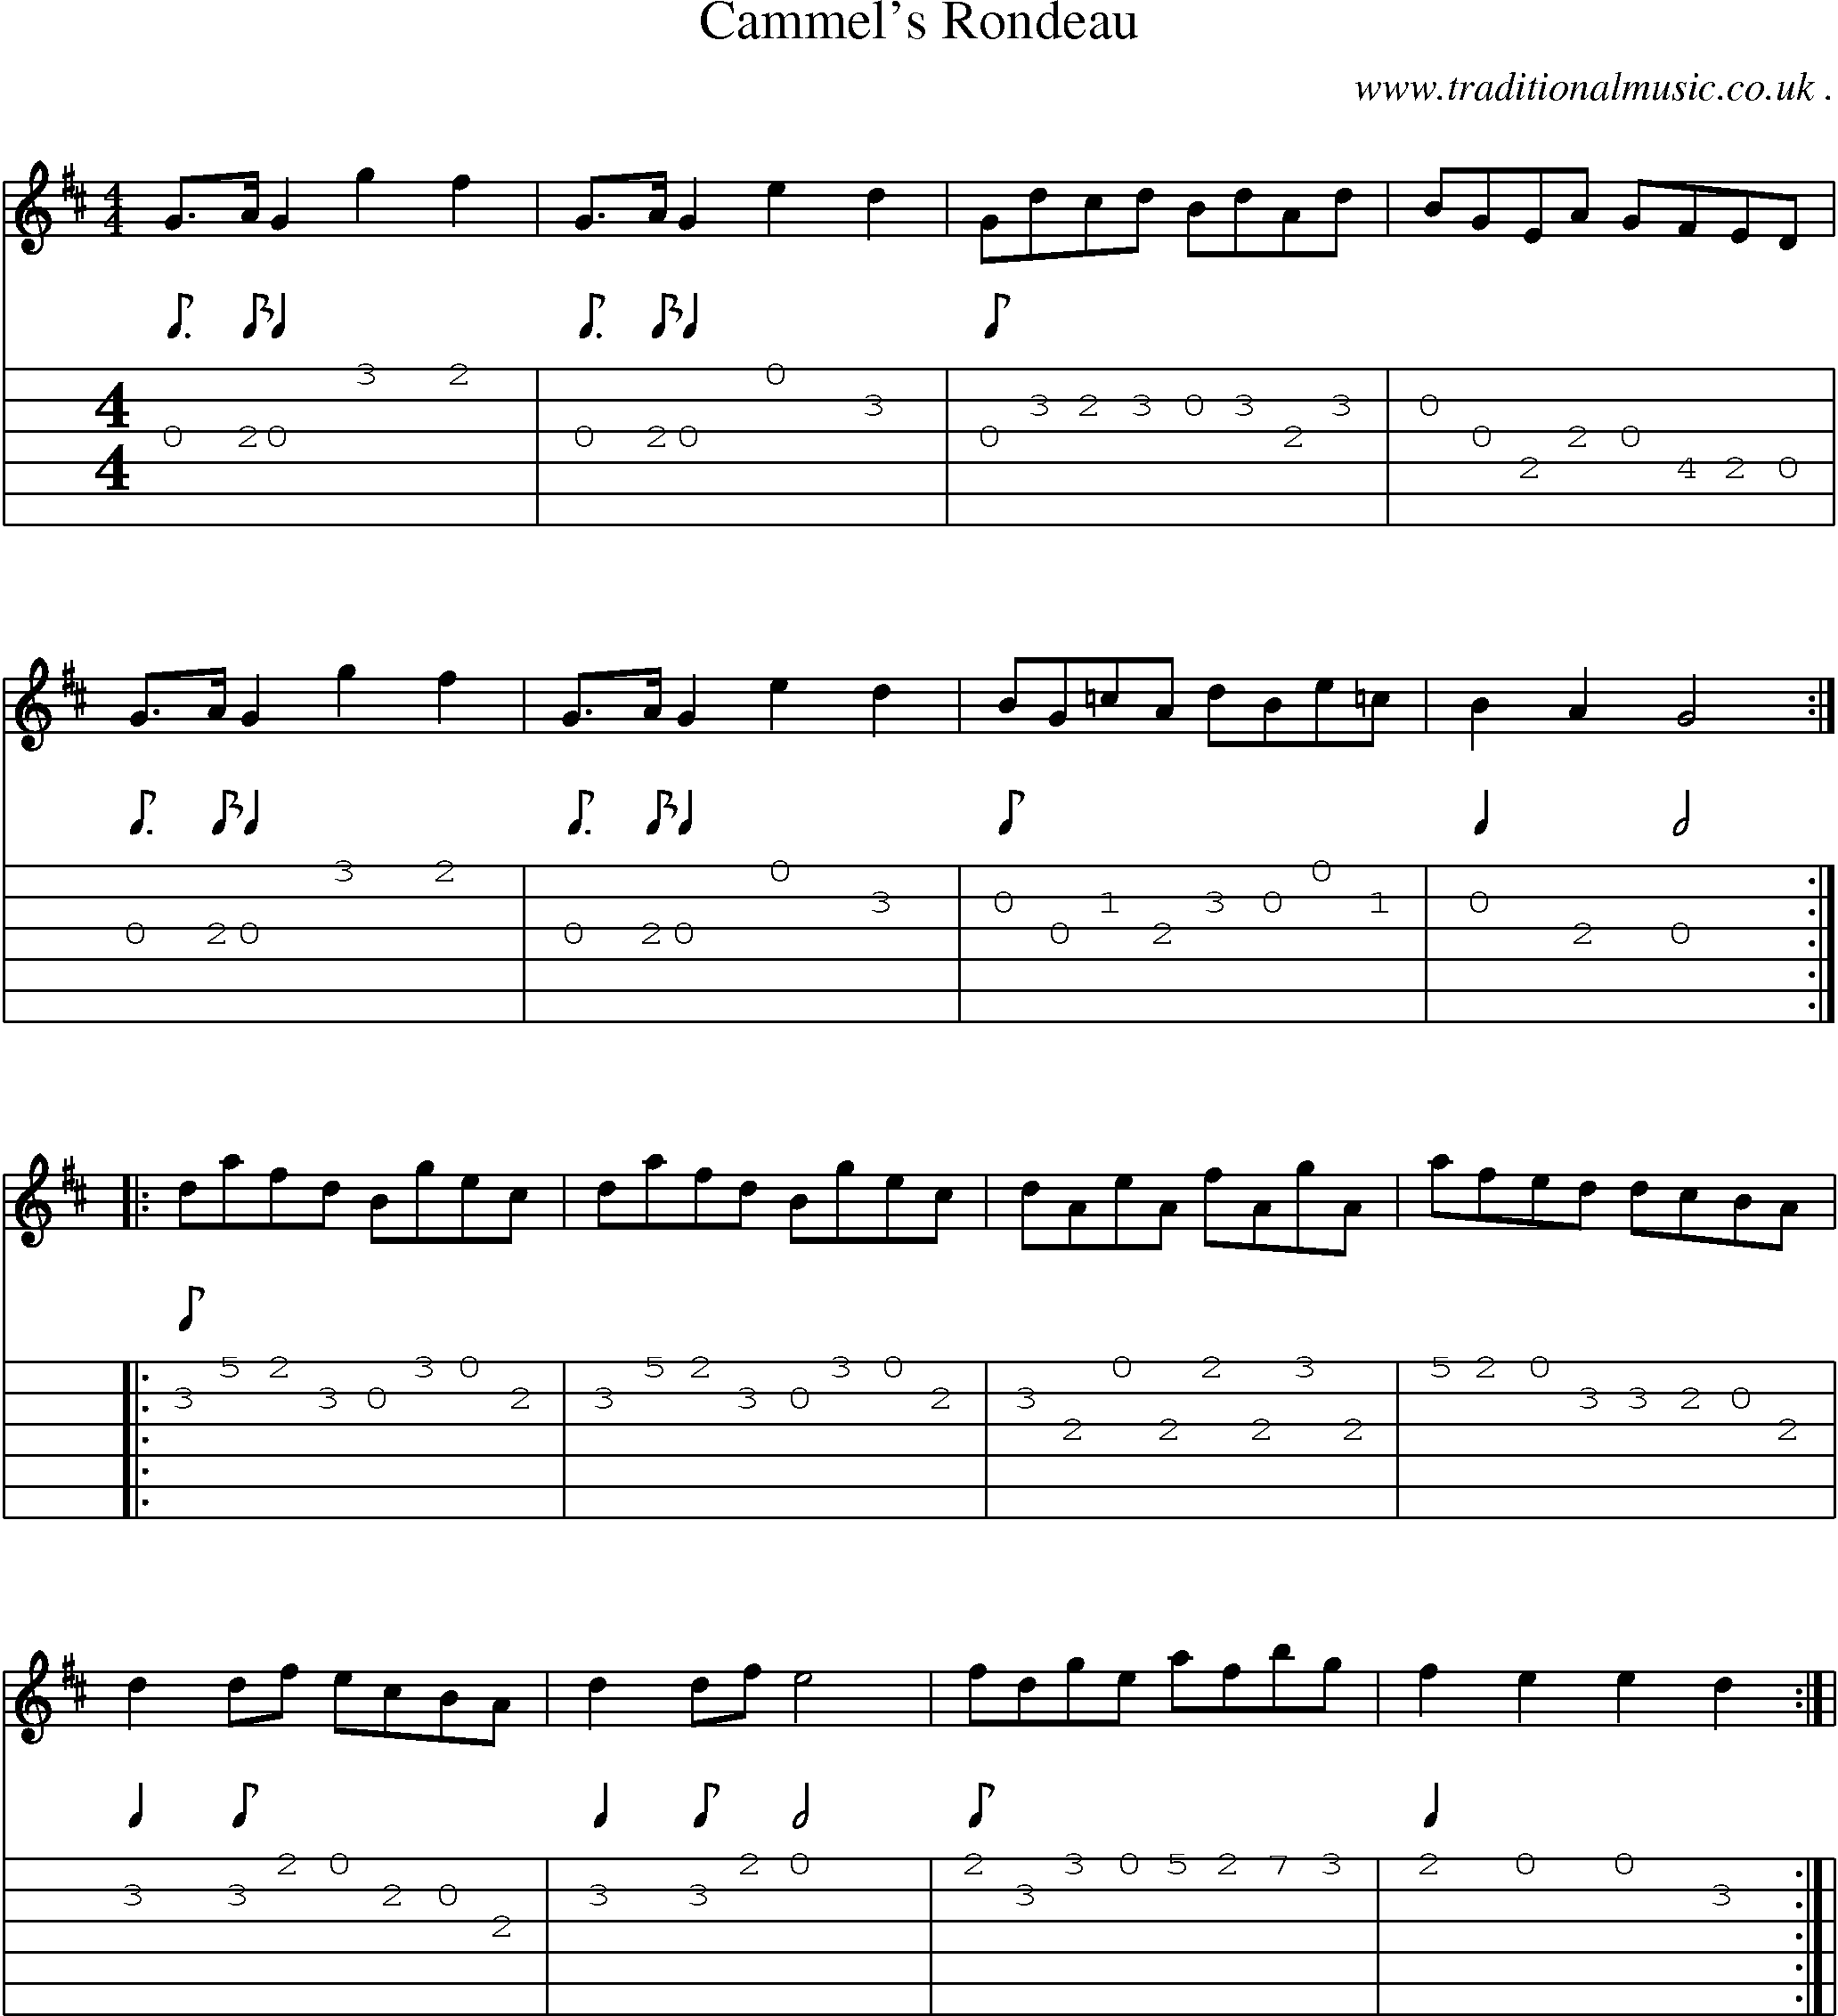 Sheet-Music and Guitar Tabs for Cammels Rondeau